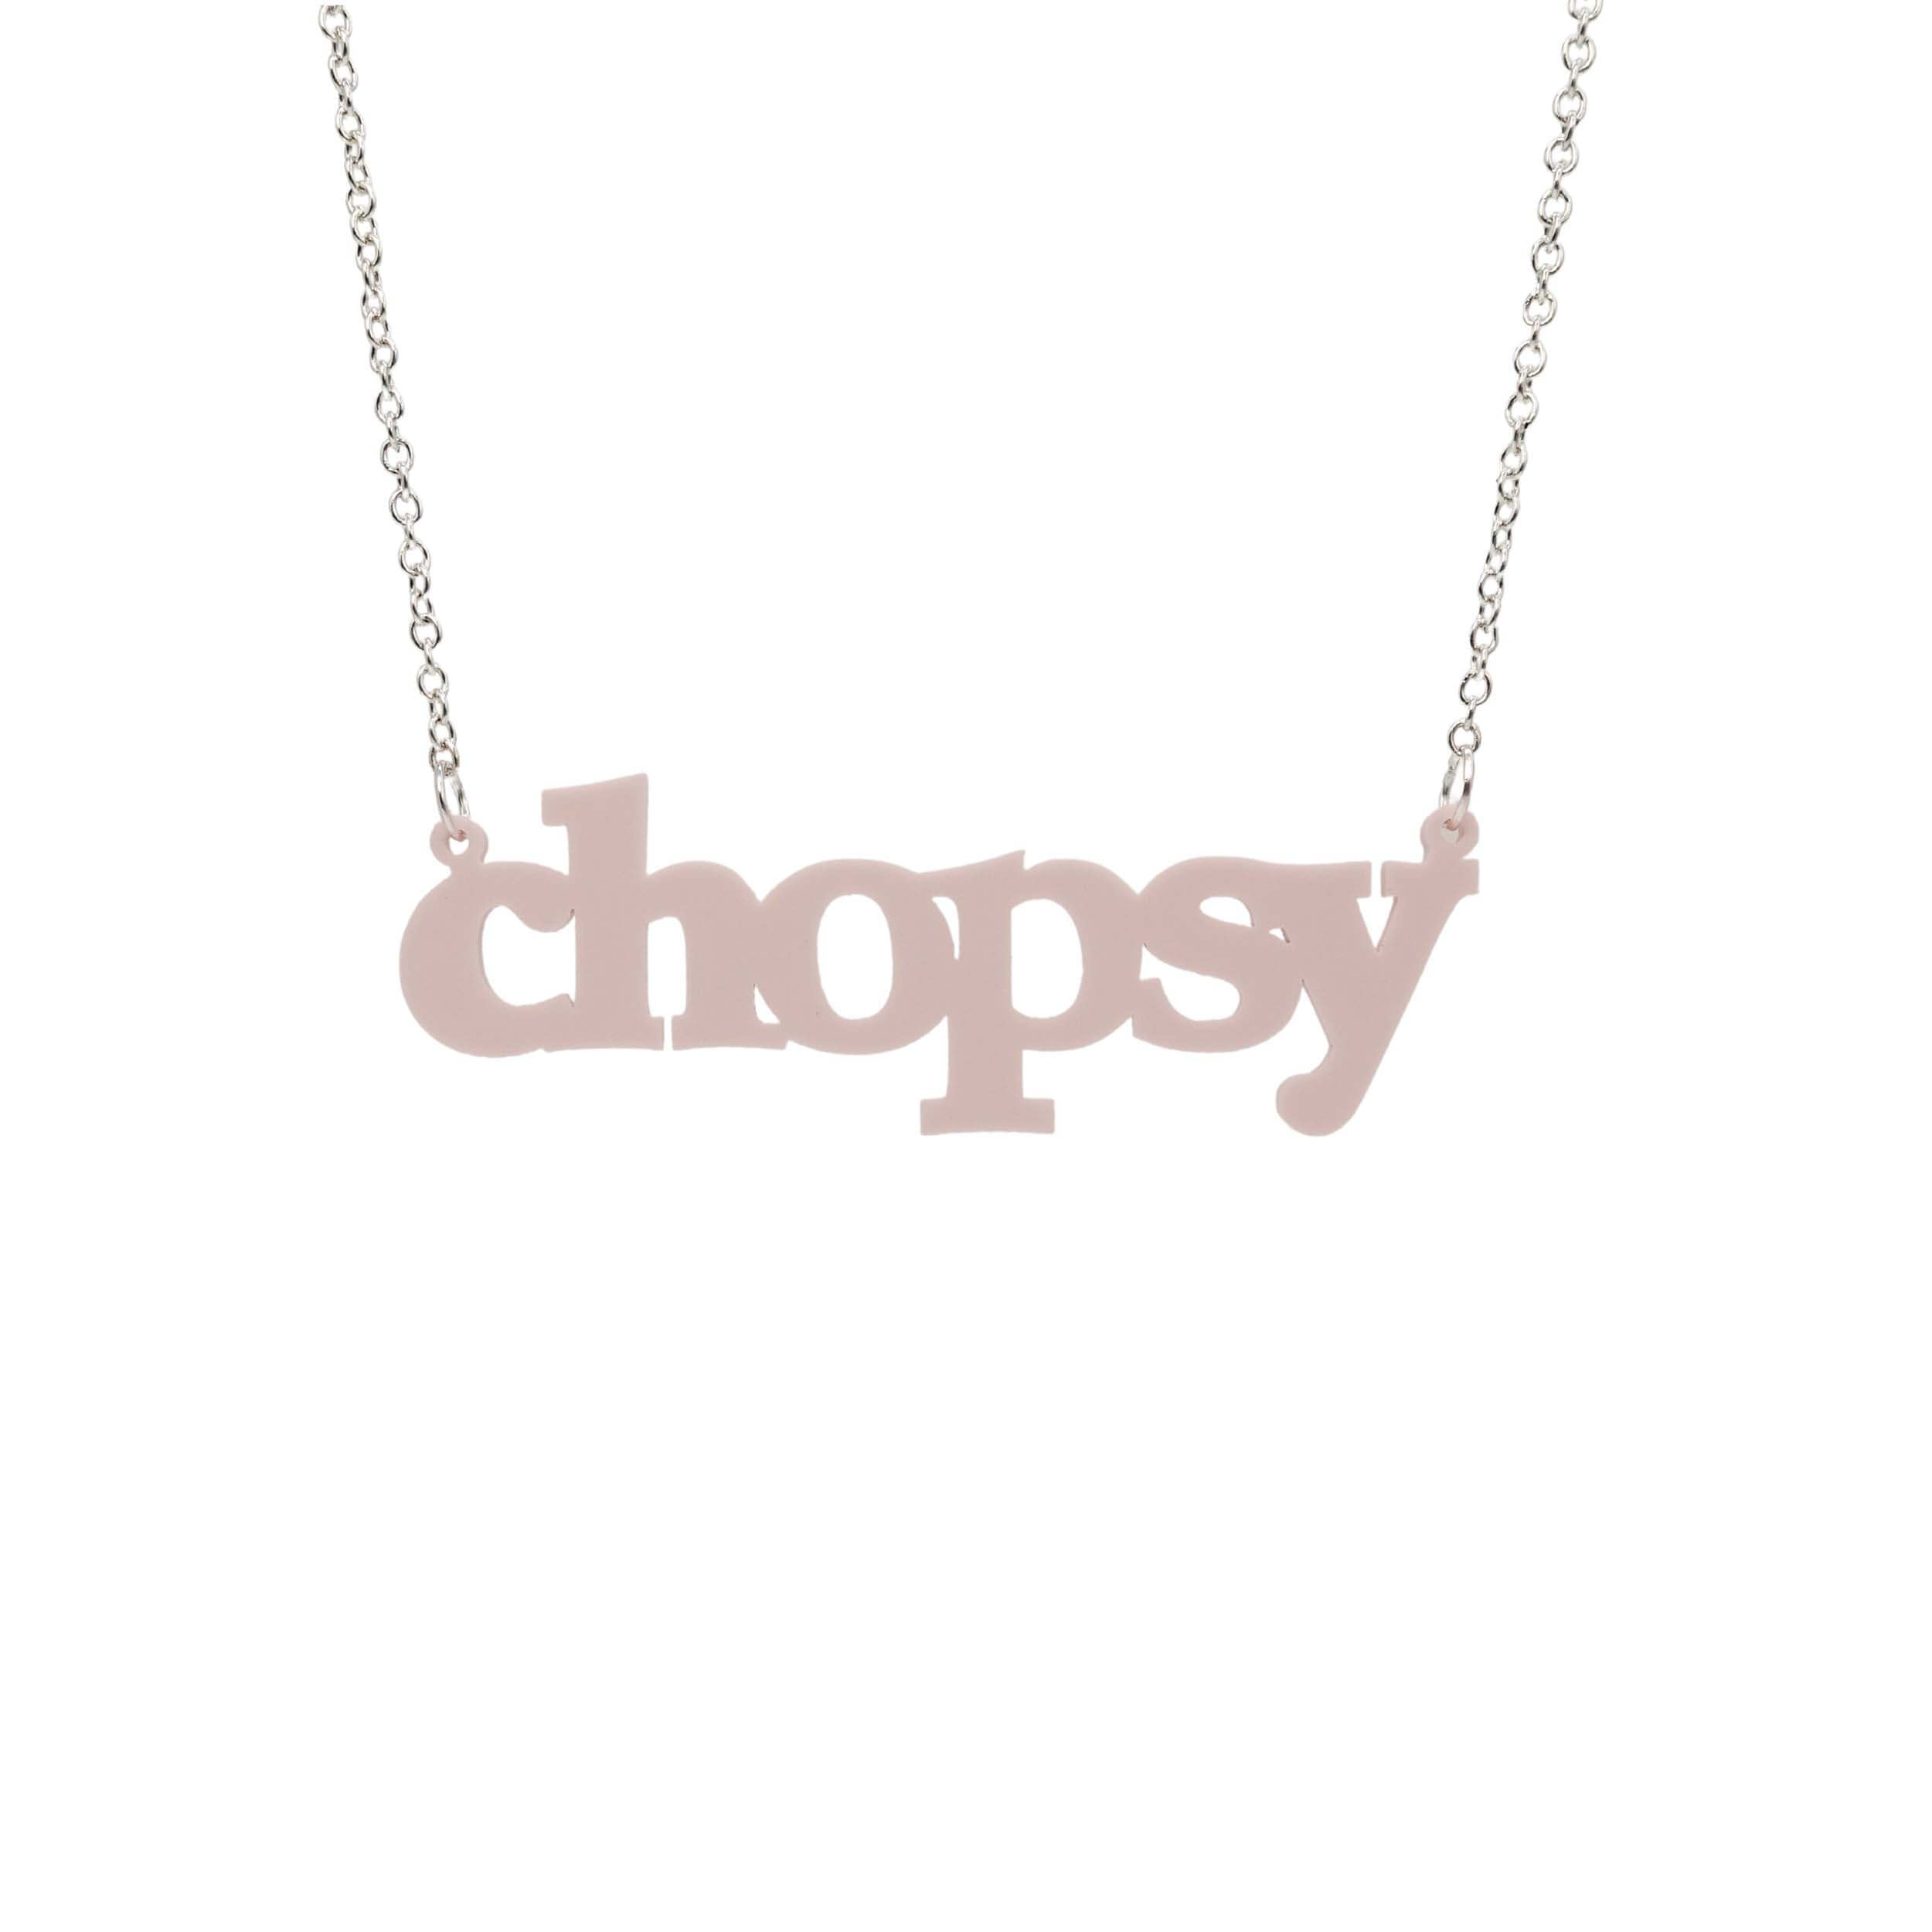 Chalk pink Chopsy necklace shown hanging against a white backround. 